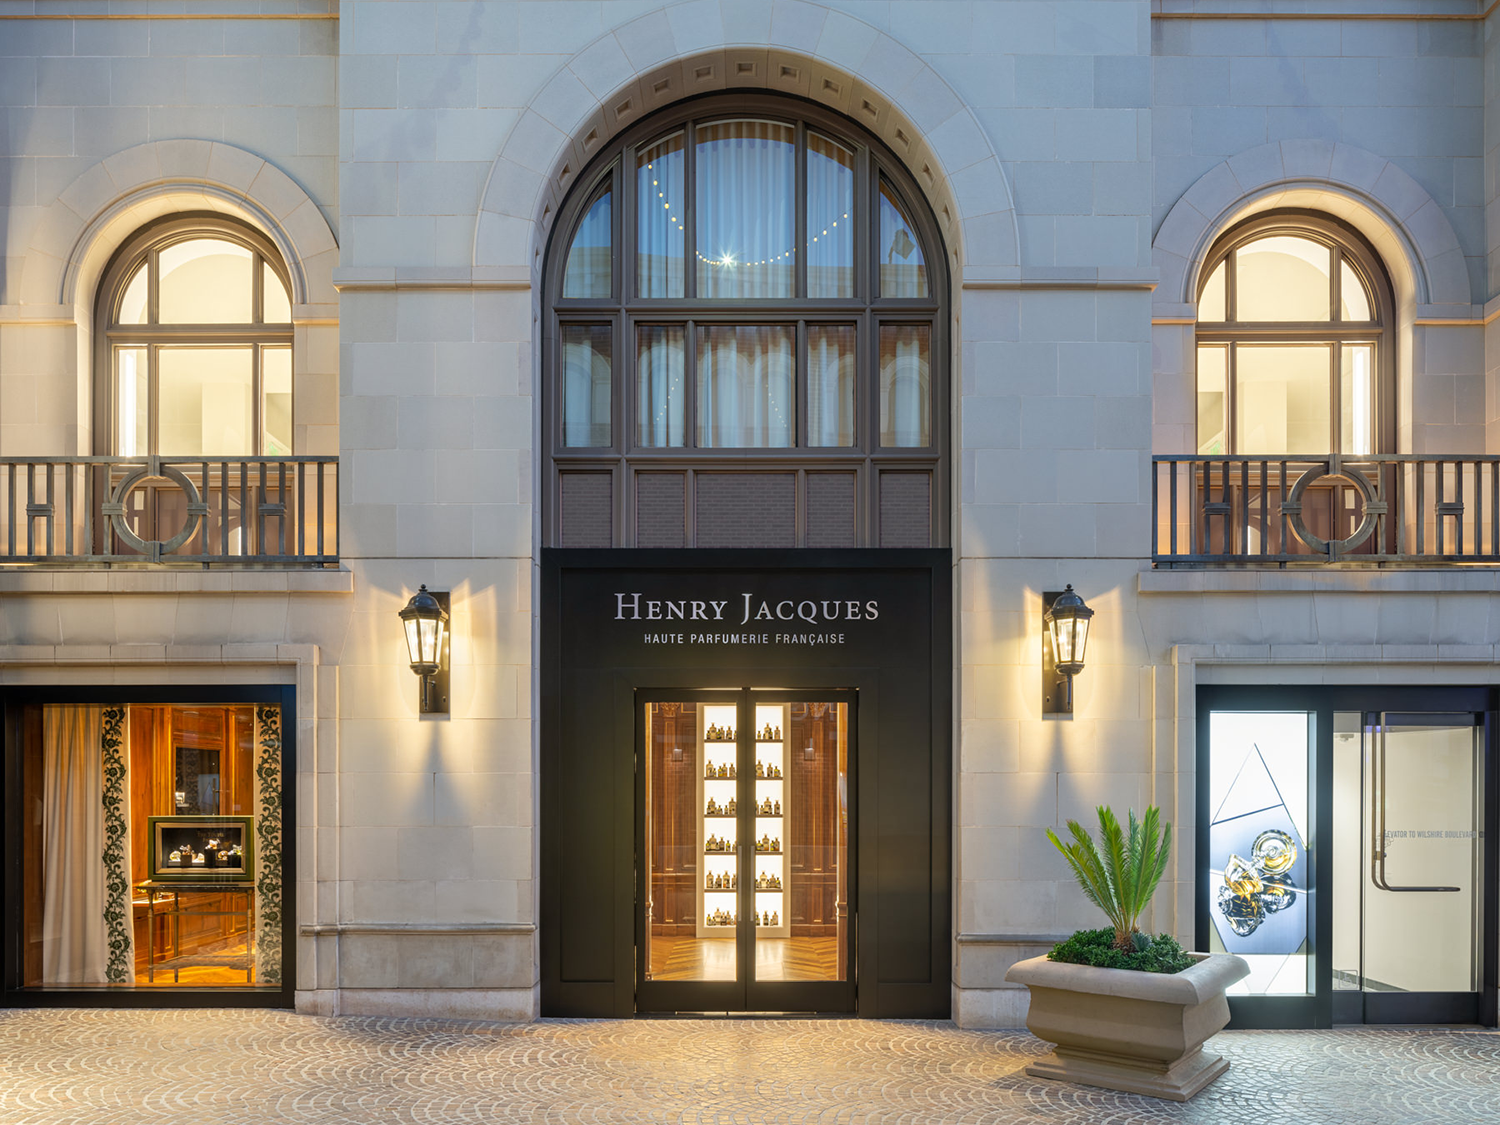 Of Flacons and Fragrances: New Henry Jacques at Two Rodeo